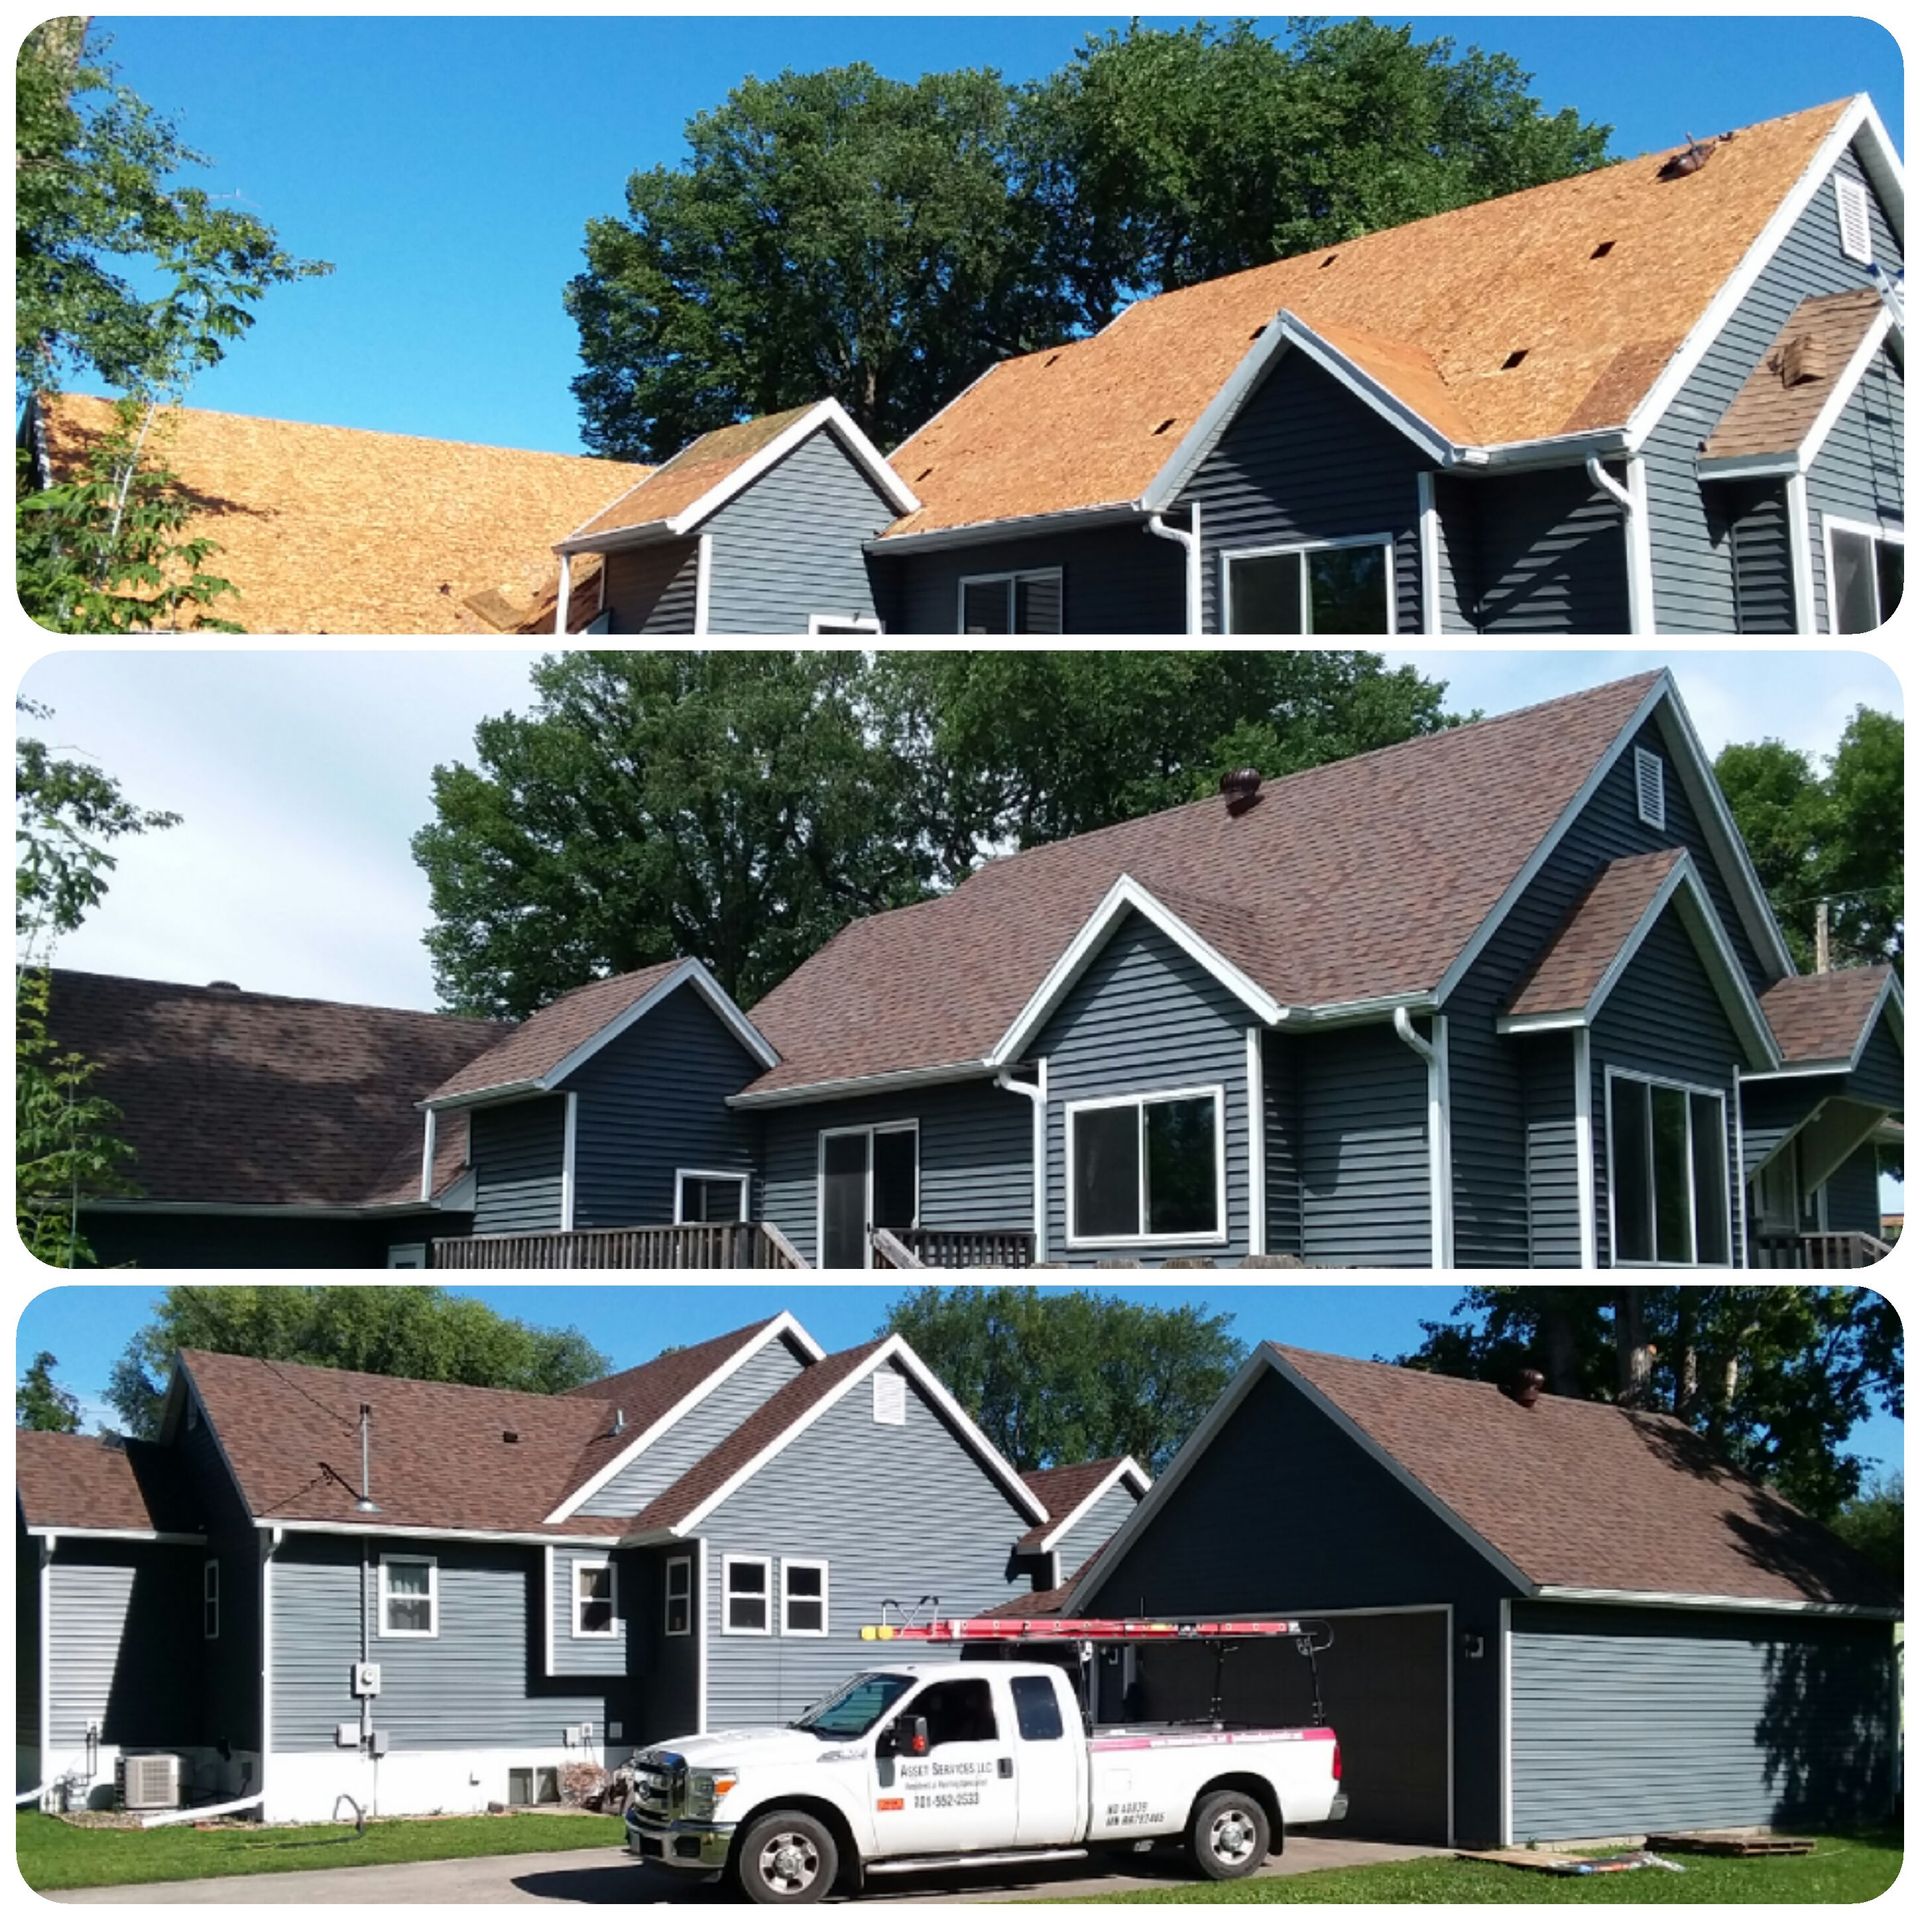 Heatherblend Colored Northgate ClimateFlex Class 4 Asphalt Shingles Installed in Grand Forks-ND